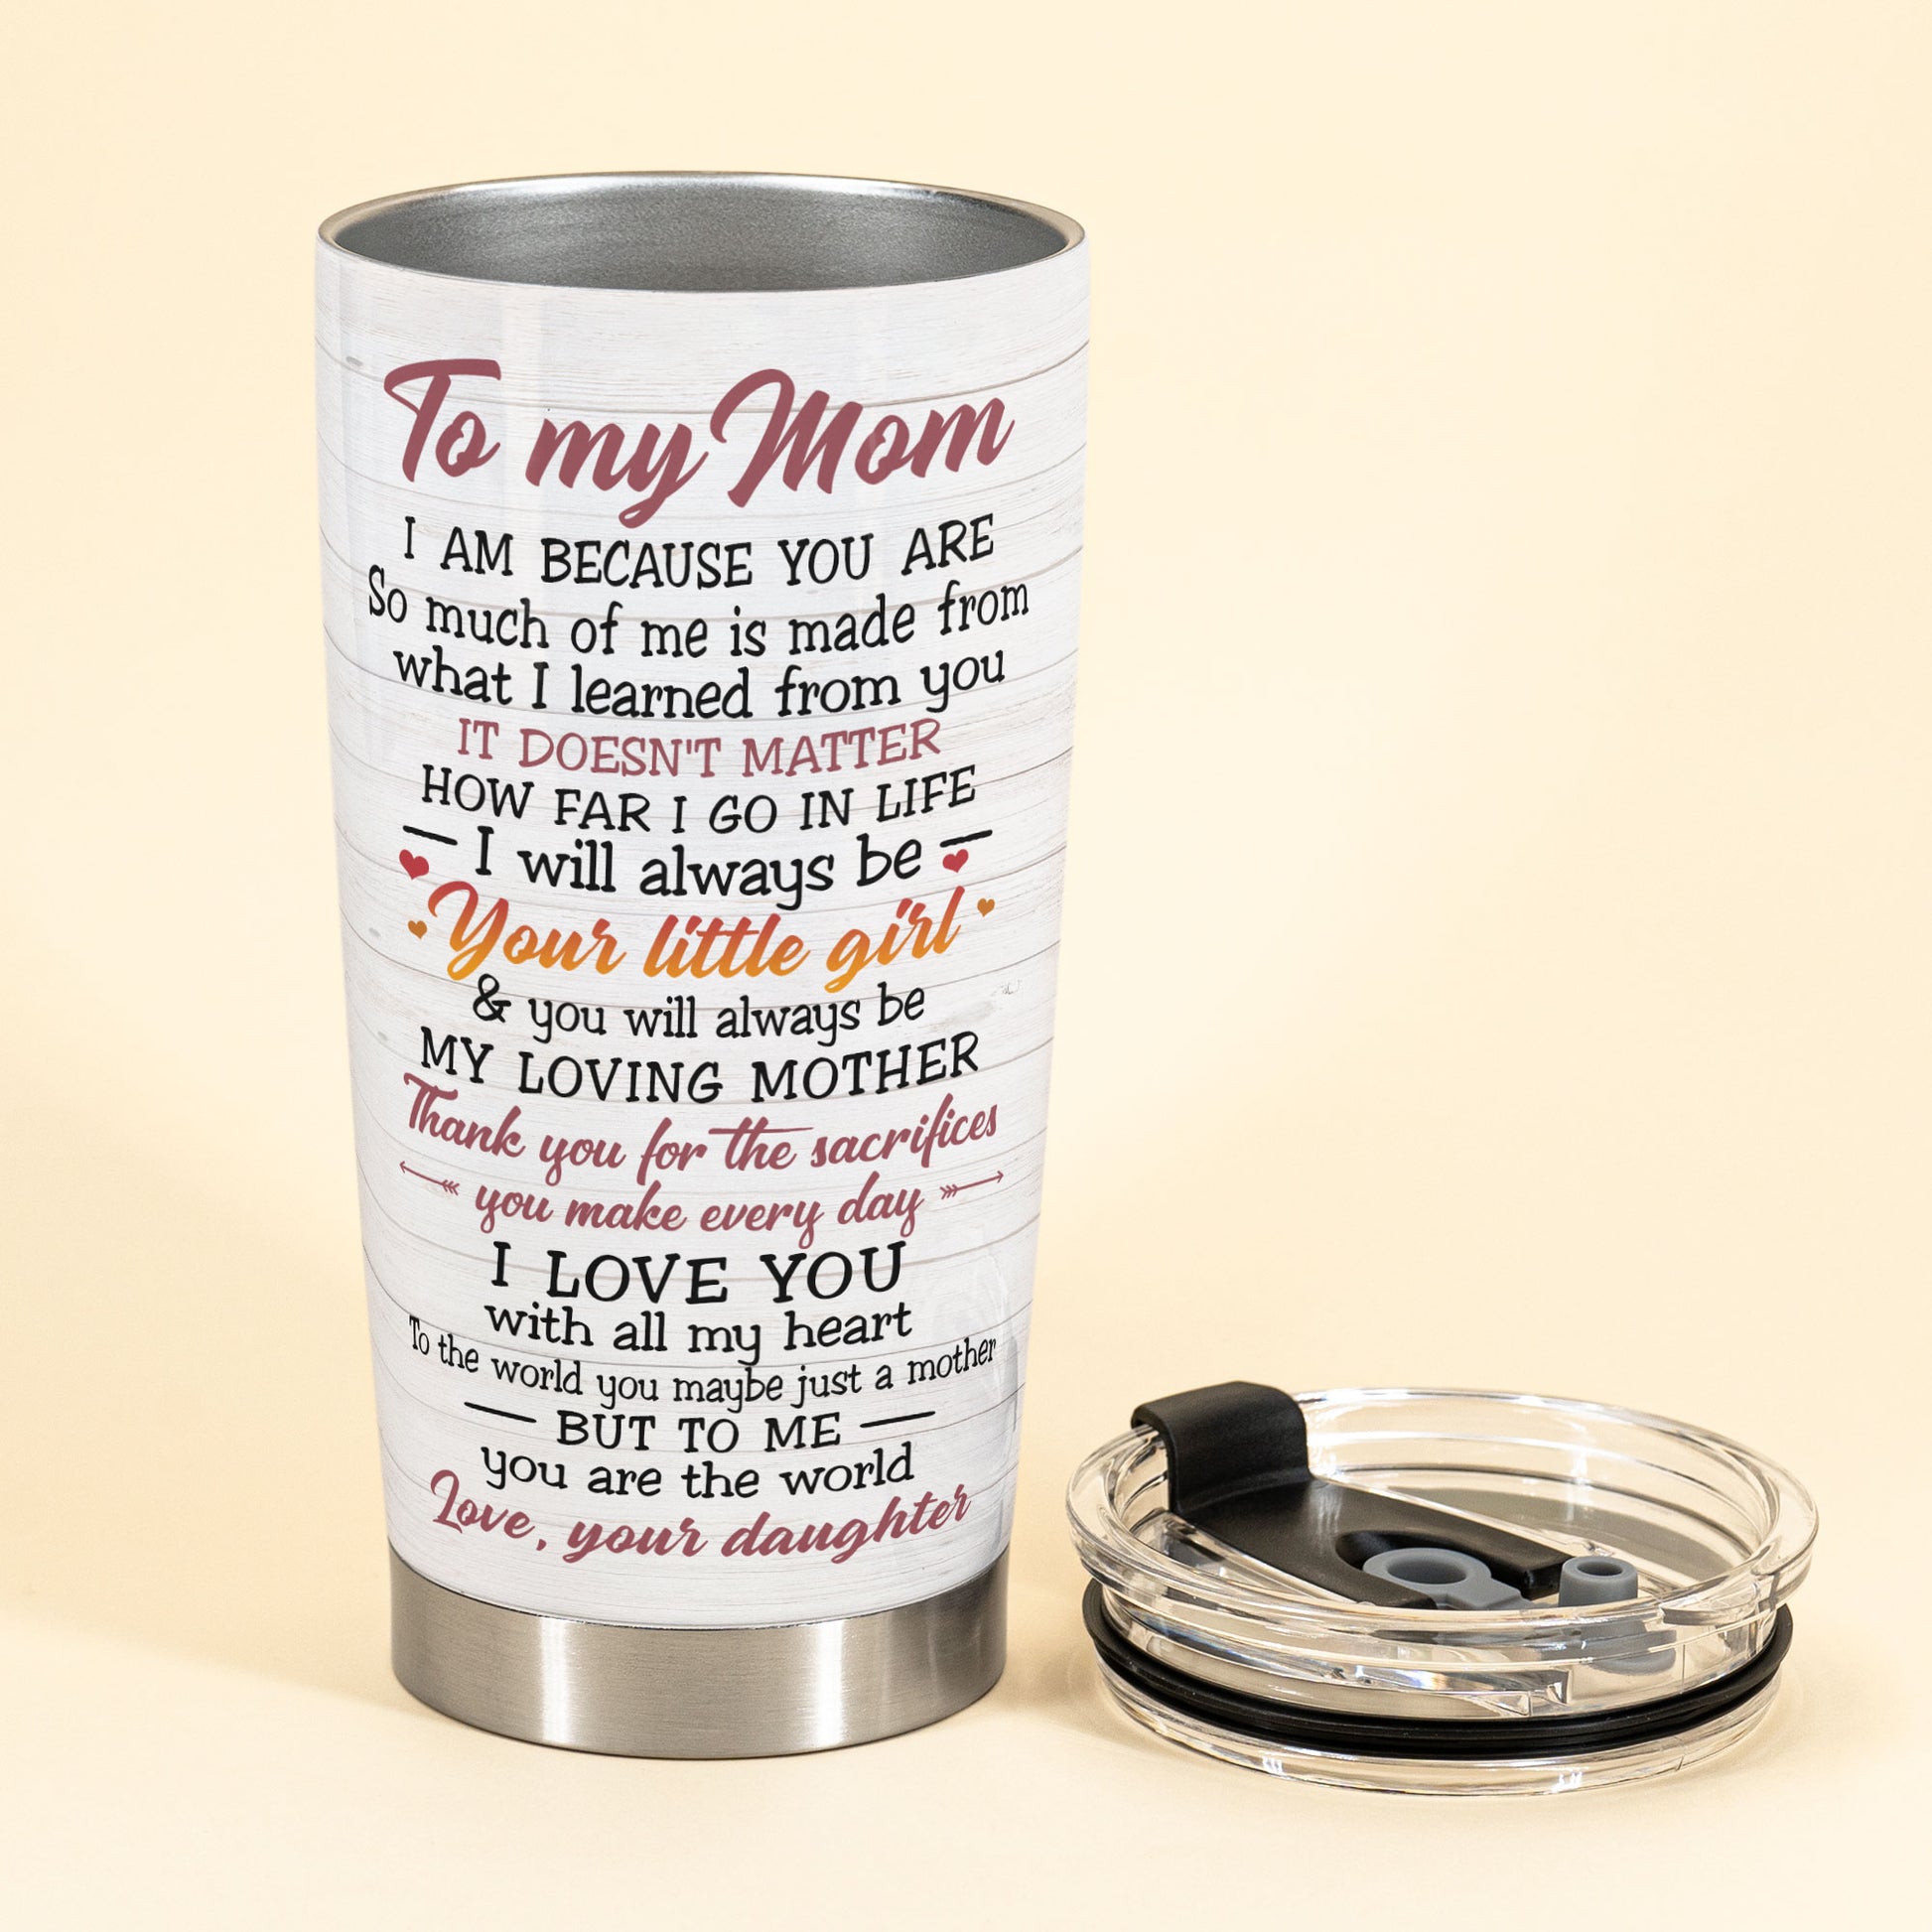 Funny Mom Tumbler Laser Engraved 20 Oz Tumbler Gift for Mom Insulated  Stainless Steel Travel Cup at Least You Don't Have Ugly Children 